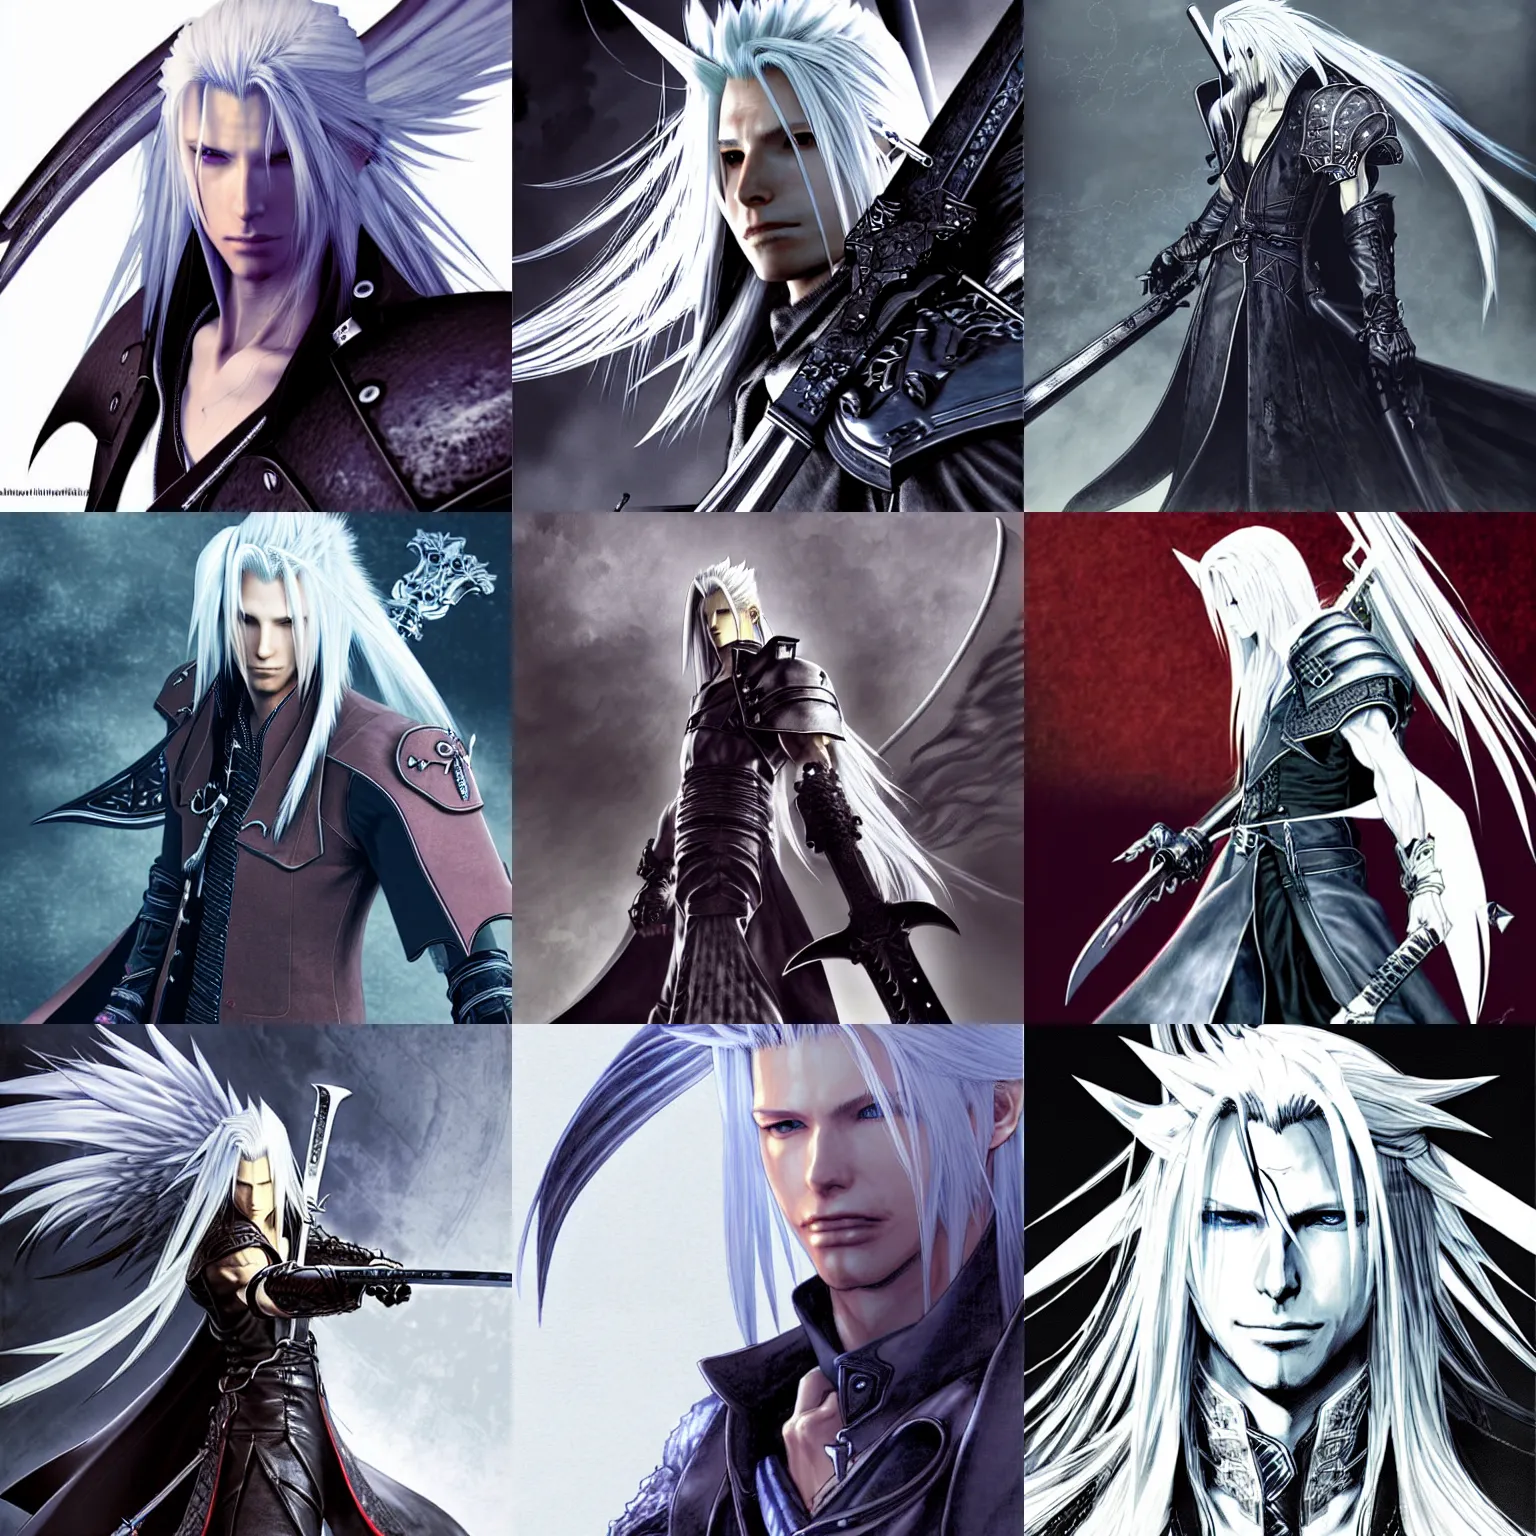 Prompt: sephiroth illustrated by akihiko yoshida, concept artwork, highly detailed